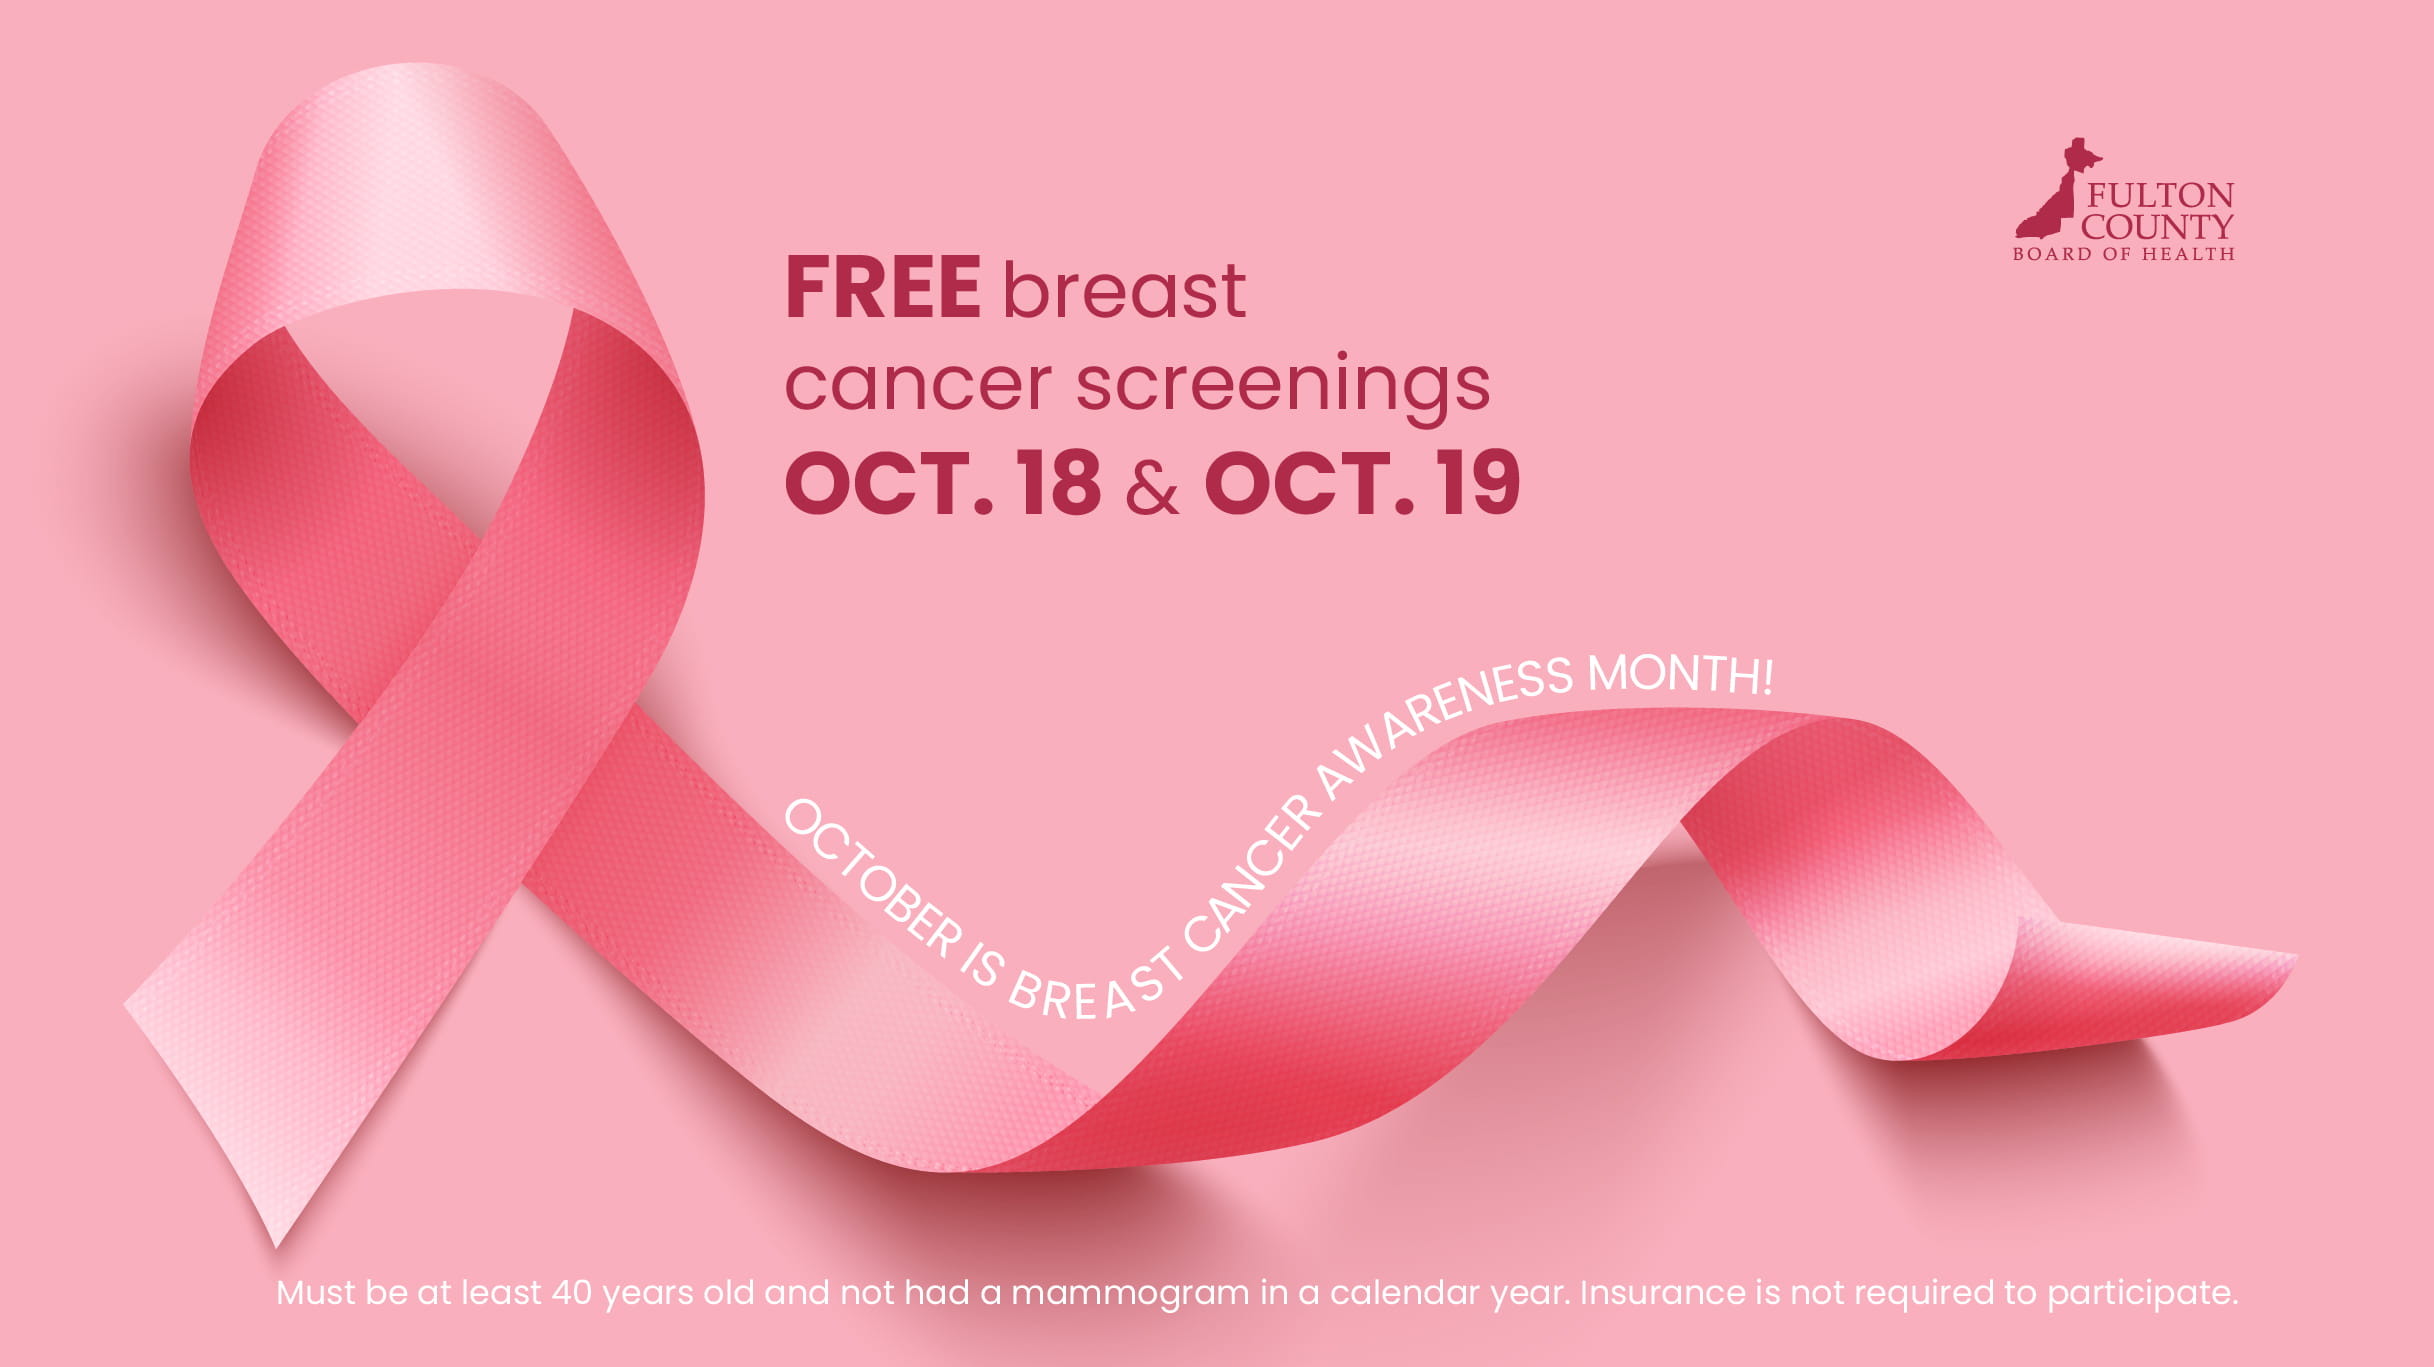 Fulton County Board Of Health To Offer Free Breast Cancer Screenings At 